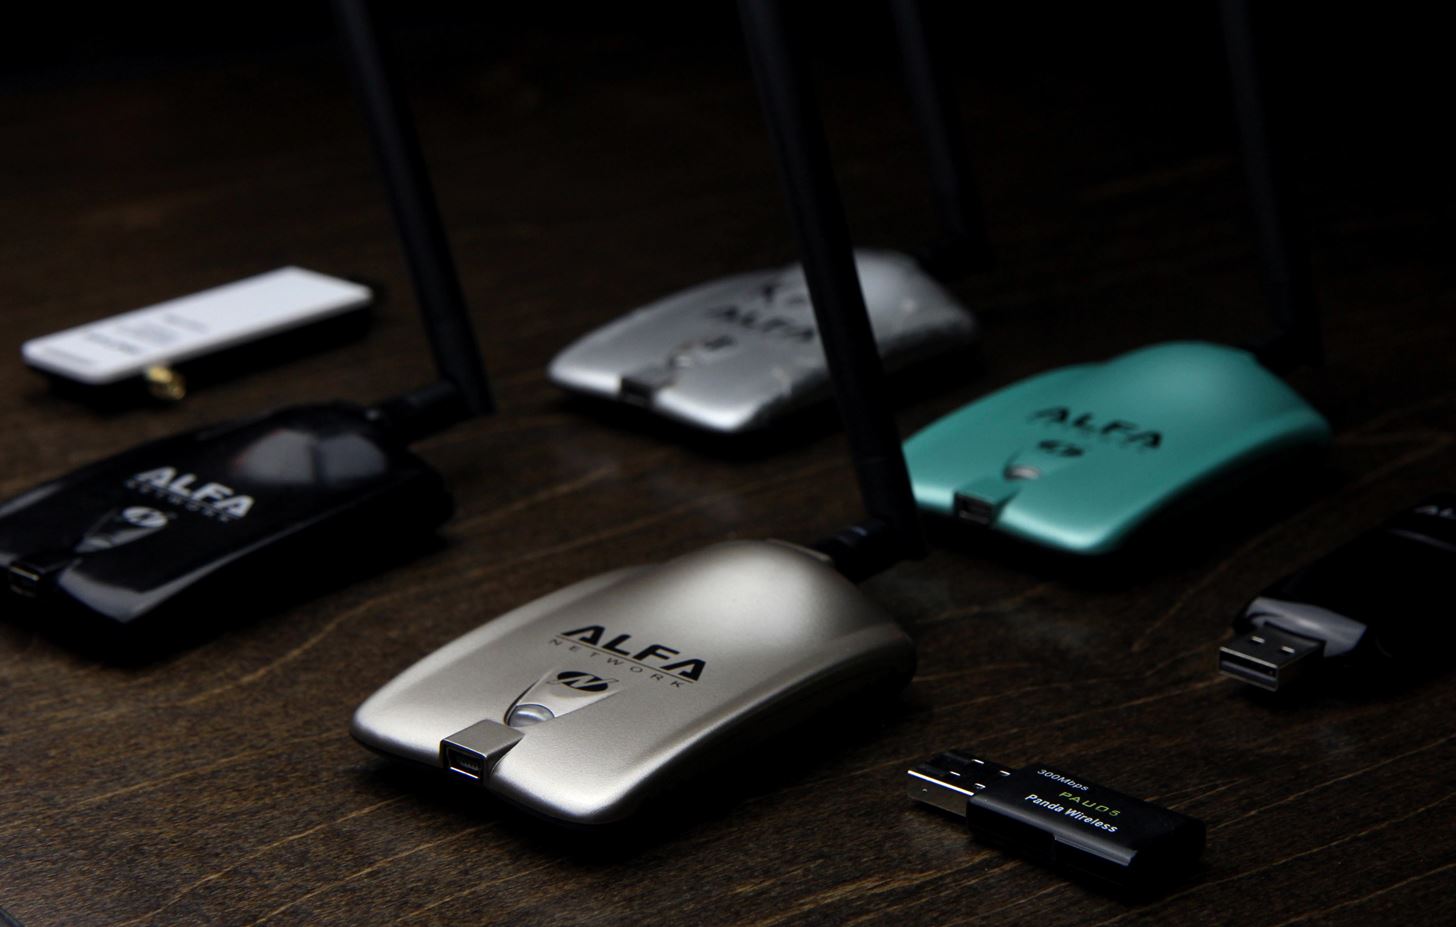 Buy the Best Wireless Network Adapter for Wi-Fi Hacking in 2019